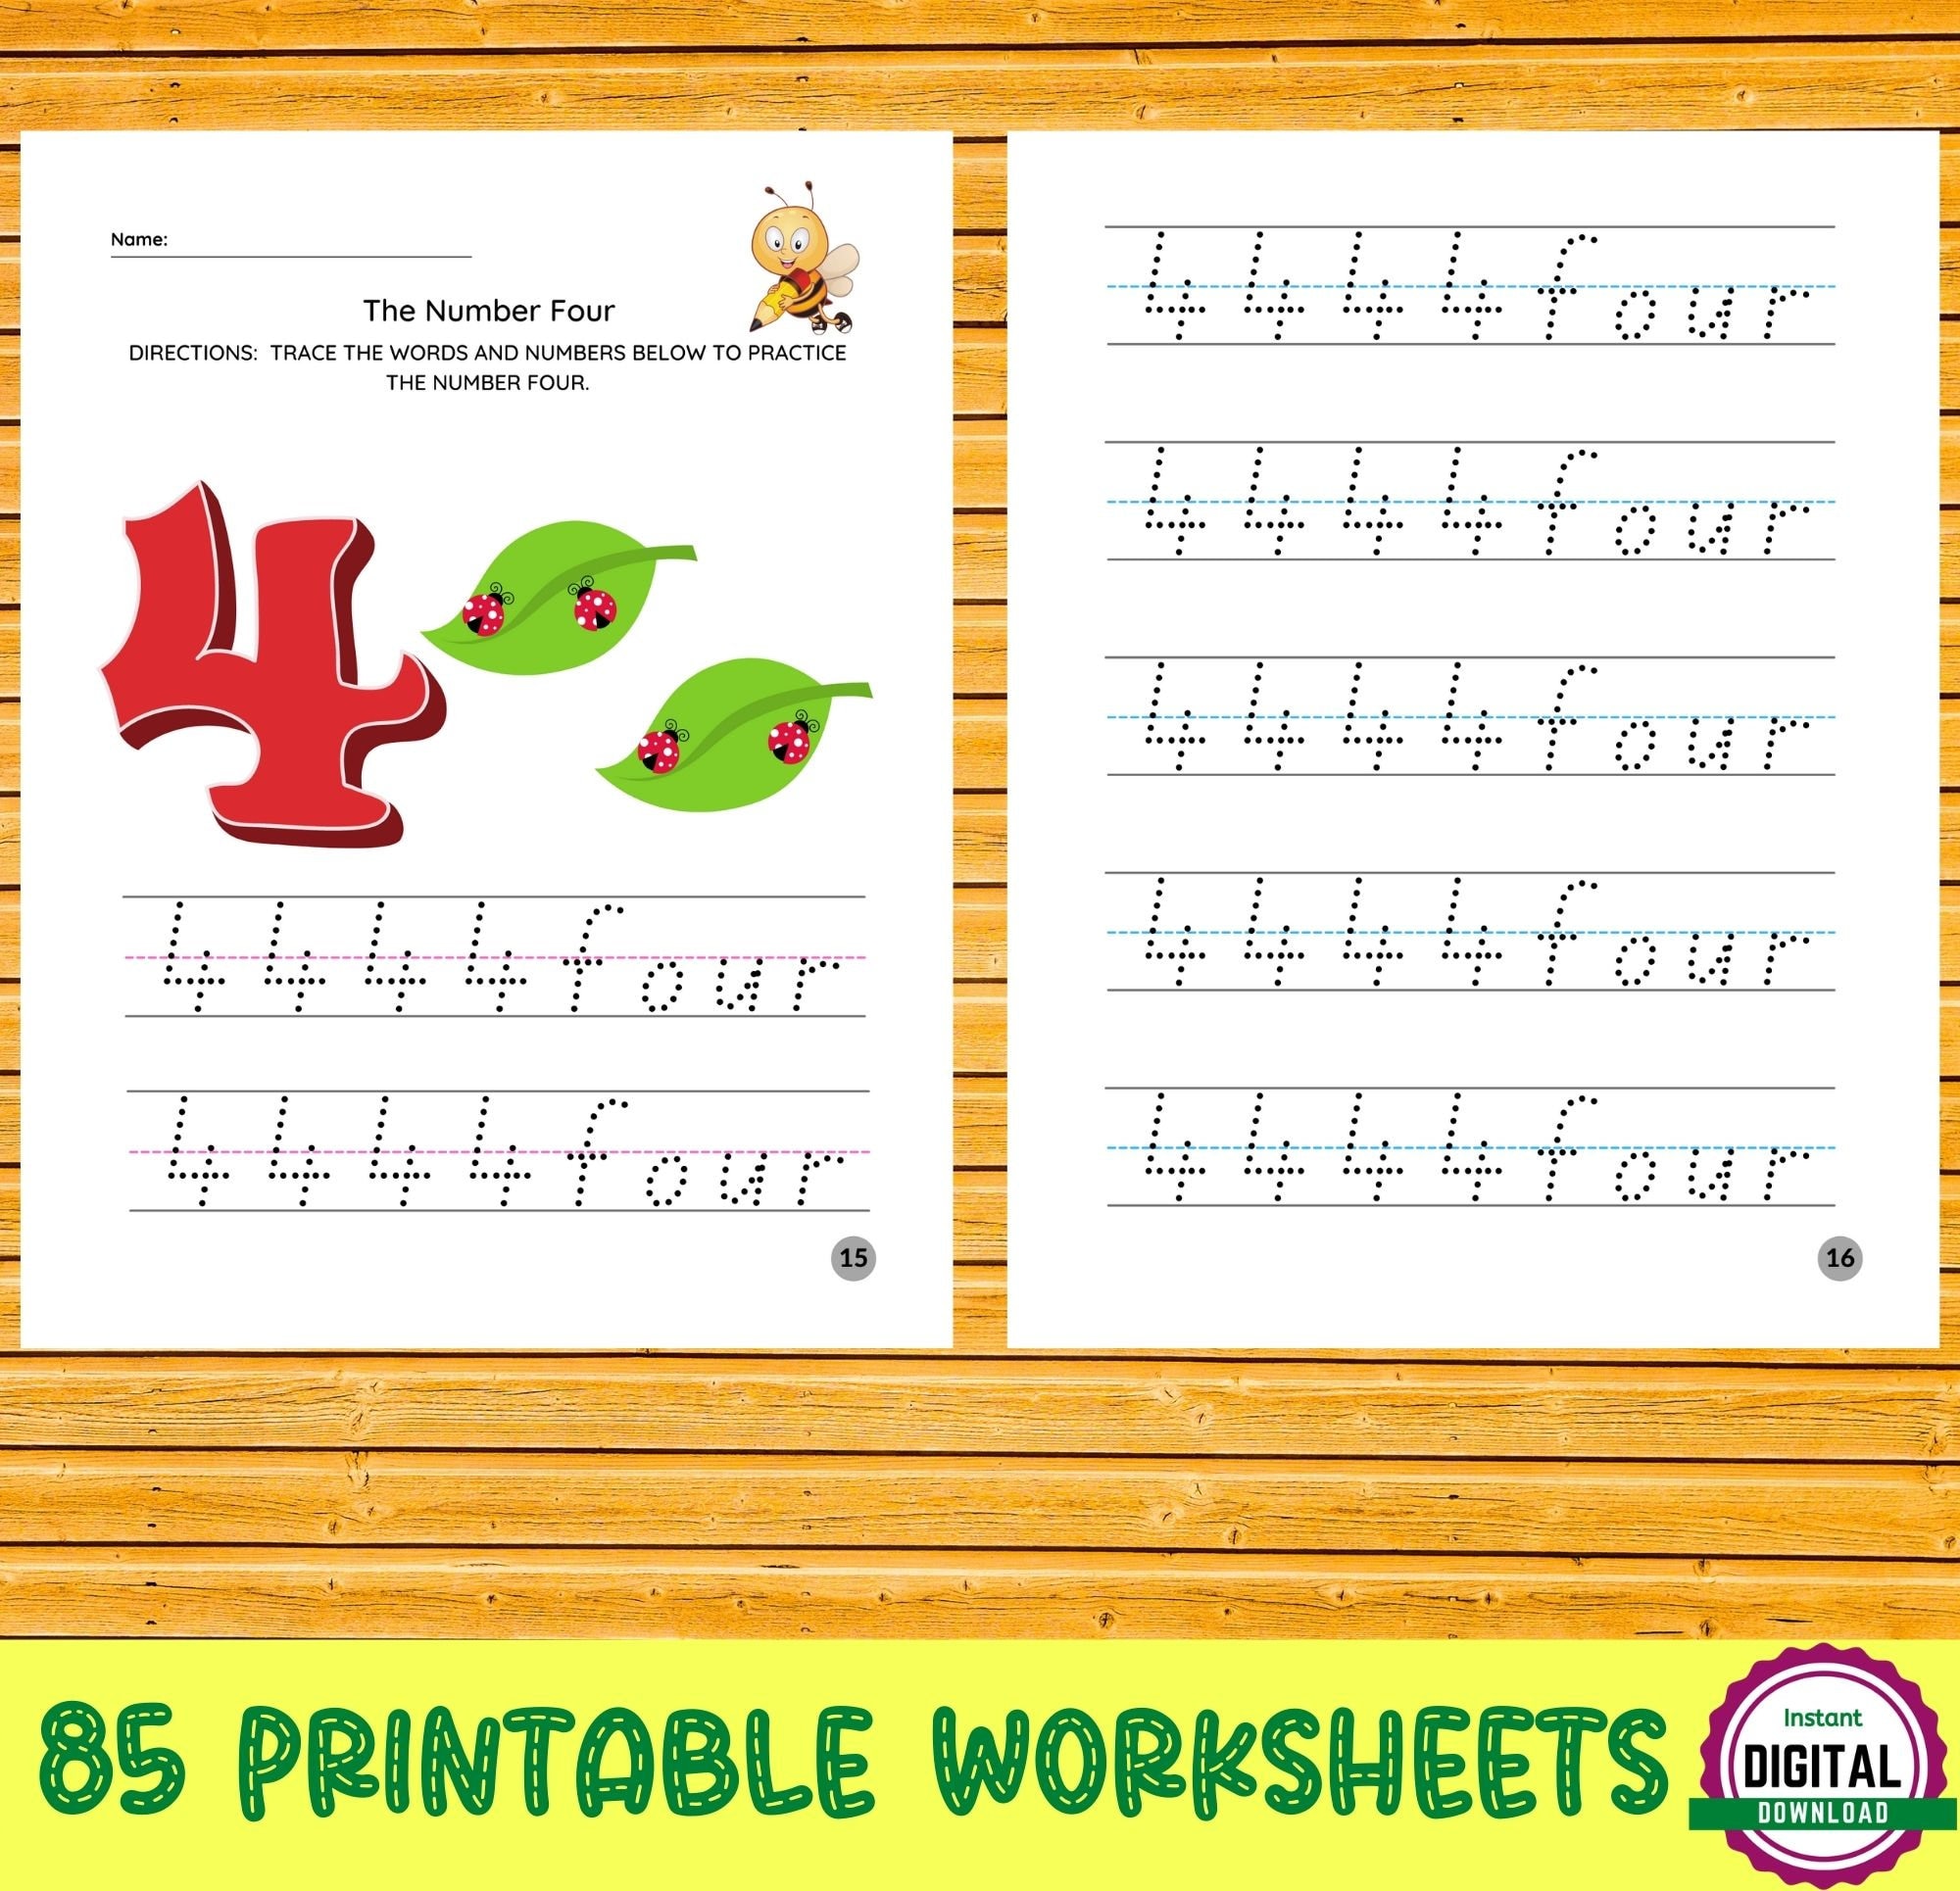 TODDLER WORKBOOK Cut Out the Shapes With Scissors 4 Printable  Worksheets,preschool Learning, Kids Activities, Tracing, 2-6 Year Old 